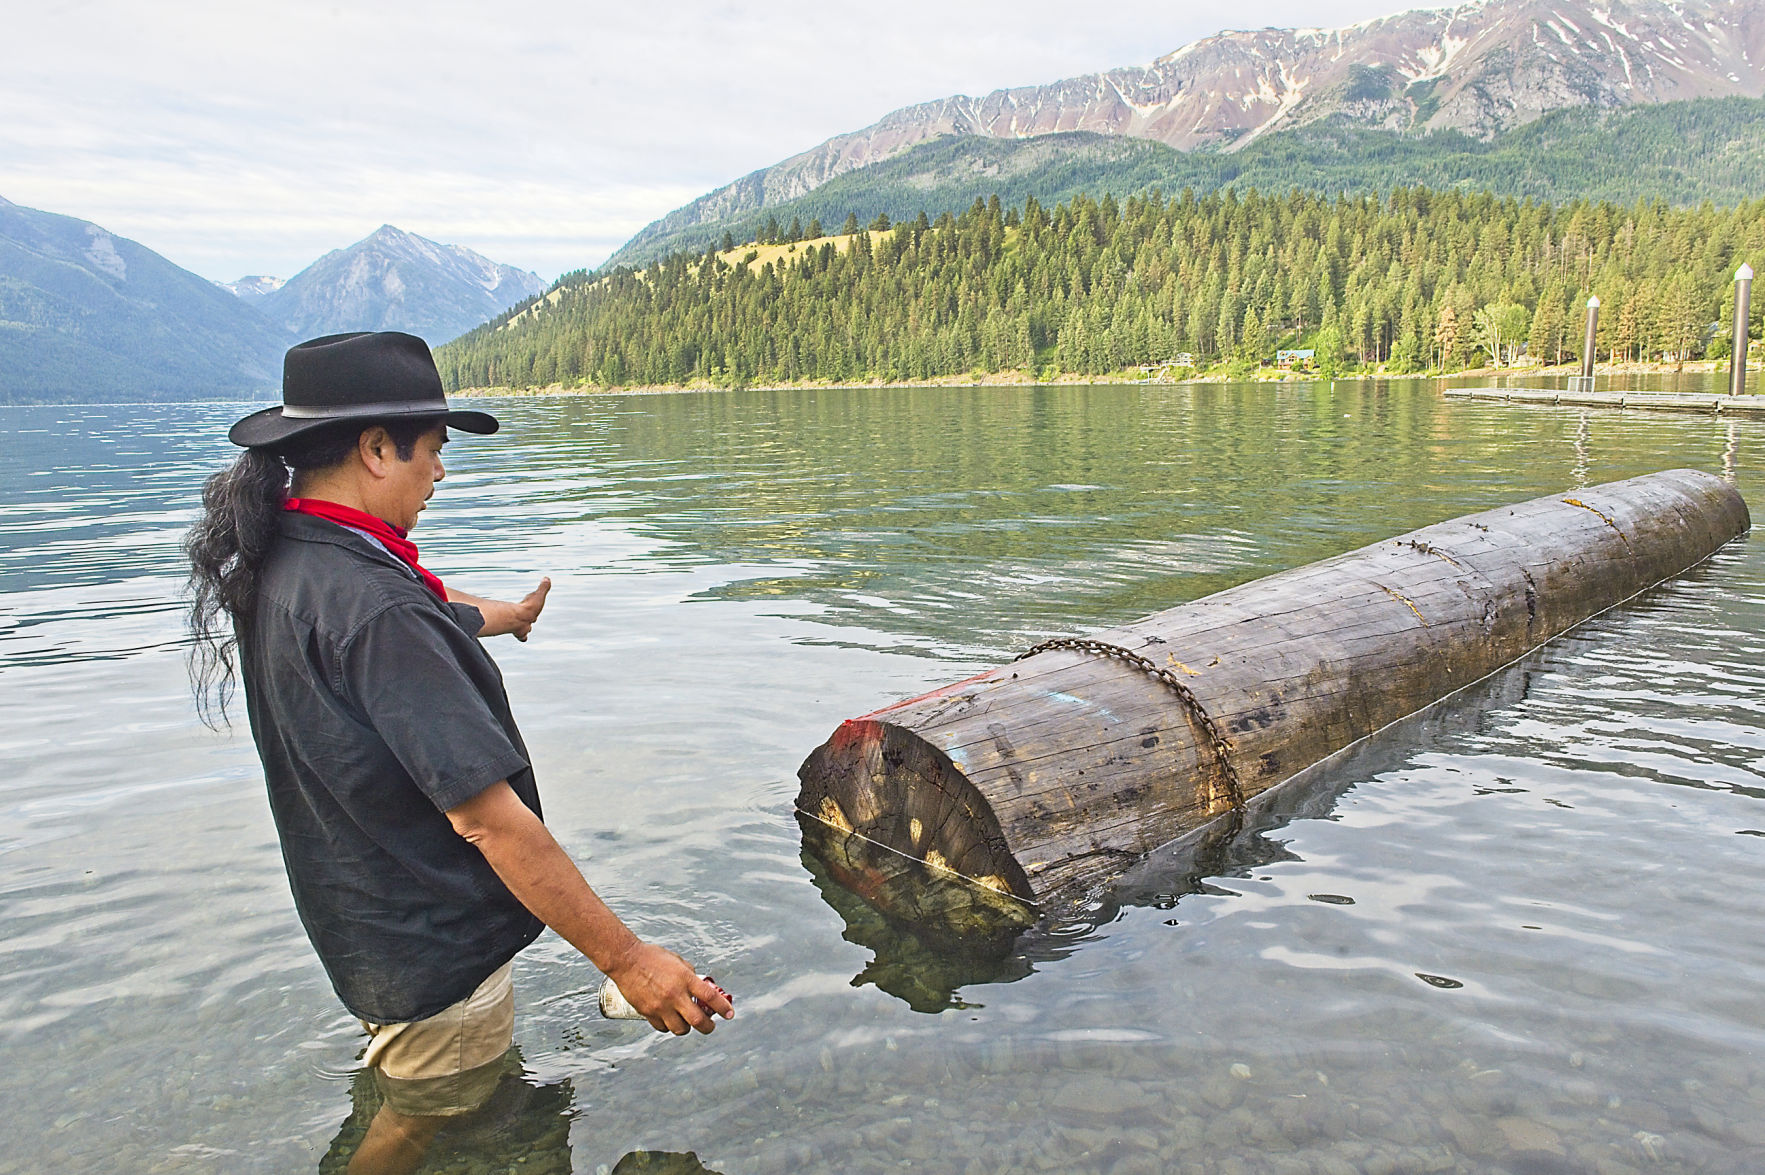 To build a canoe: Nez Perce to build dugout canoes for water